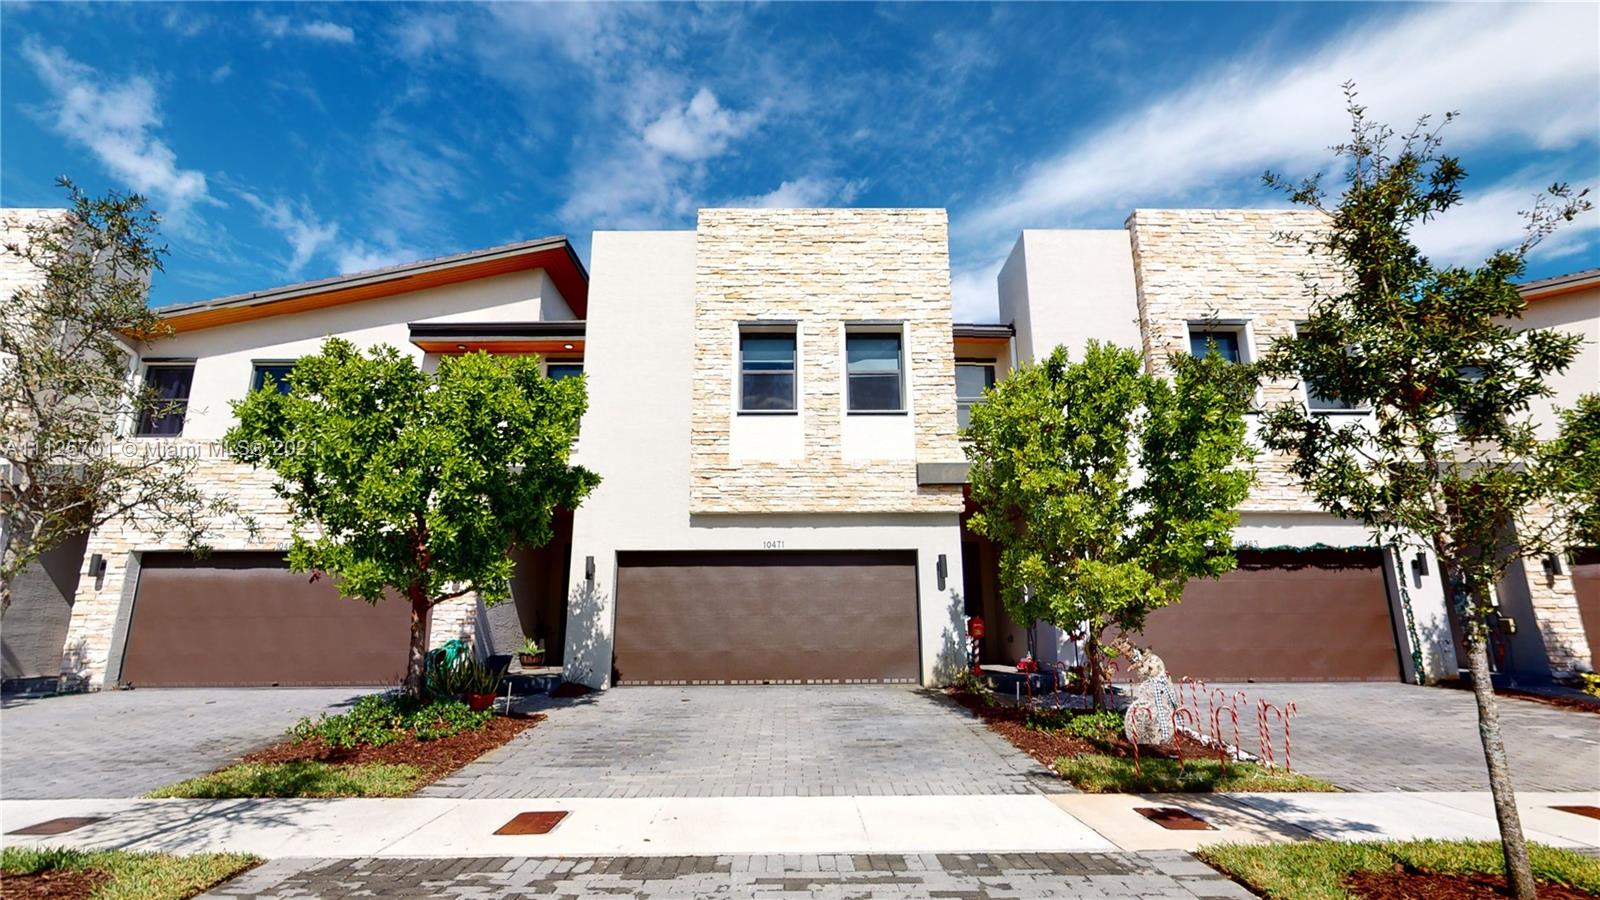 Beautiful Townhouse   in a quiet gated community, 4bed/3bath/1, title floor in the first level home, 2 Story, new kitchen with quartz countertop. Located in one of the best communities in Doral (Summit At Park Central), Ready for a family to enjoy.  High impact door and windows on the first floor. Only 3 years of construction. Owners leaving before closing. Amazing Club House, Gym, Pools, Bike Trails, Soccer Field, Tennis Court, Spectacular Restaurant, Security Patrol, Banquet Hall, and much more. Close to airports, Malls, Restaurants, recognized A+ Schools, and more.  This property will be ready to show from 11/22/2021 by appointment. Appointments ONLY, 24 HOURS IN ADVANCE,!!!!!!! SHOWING ASSIST.